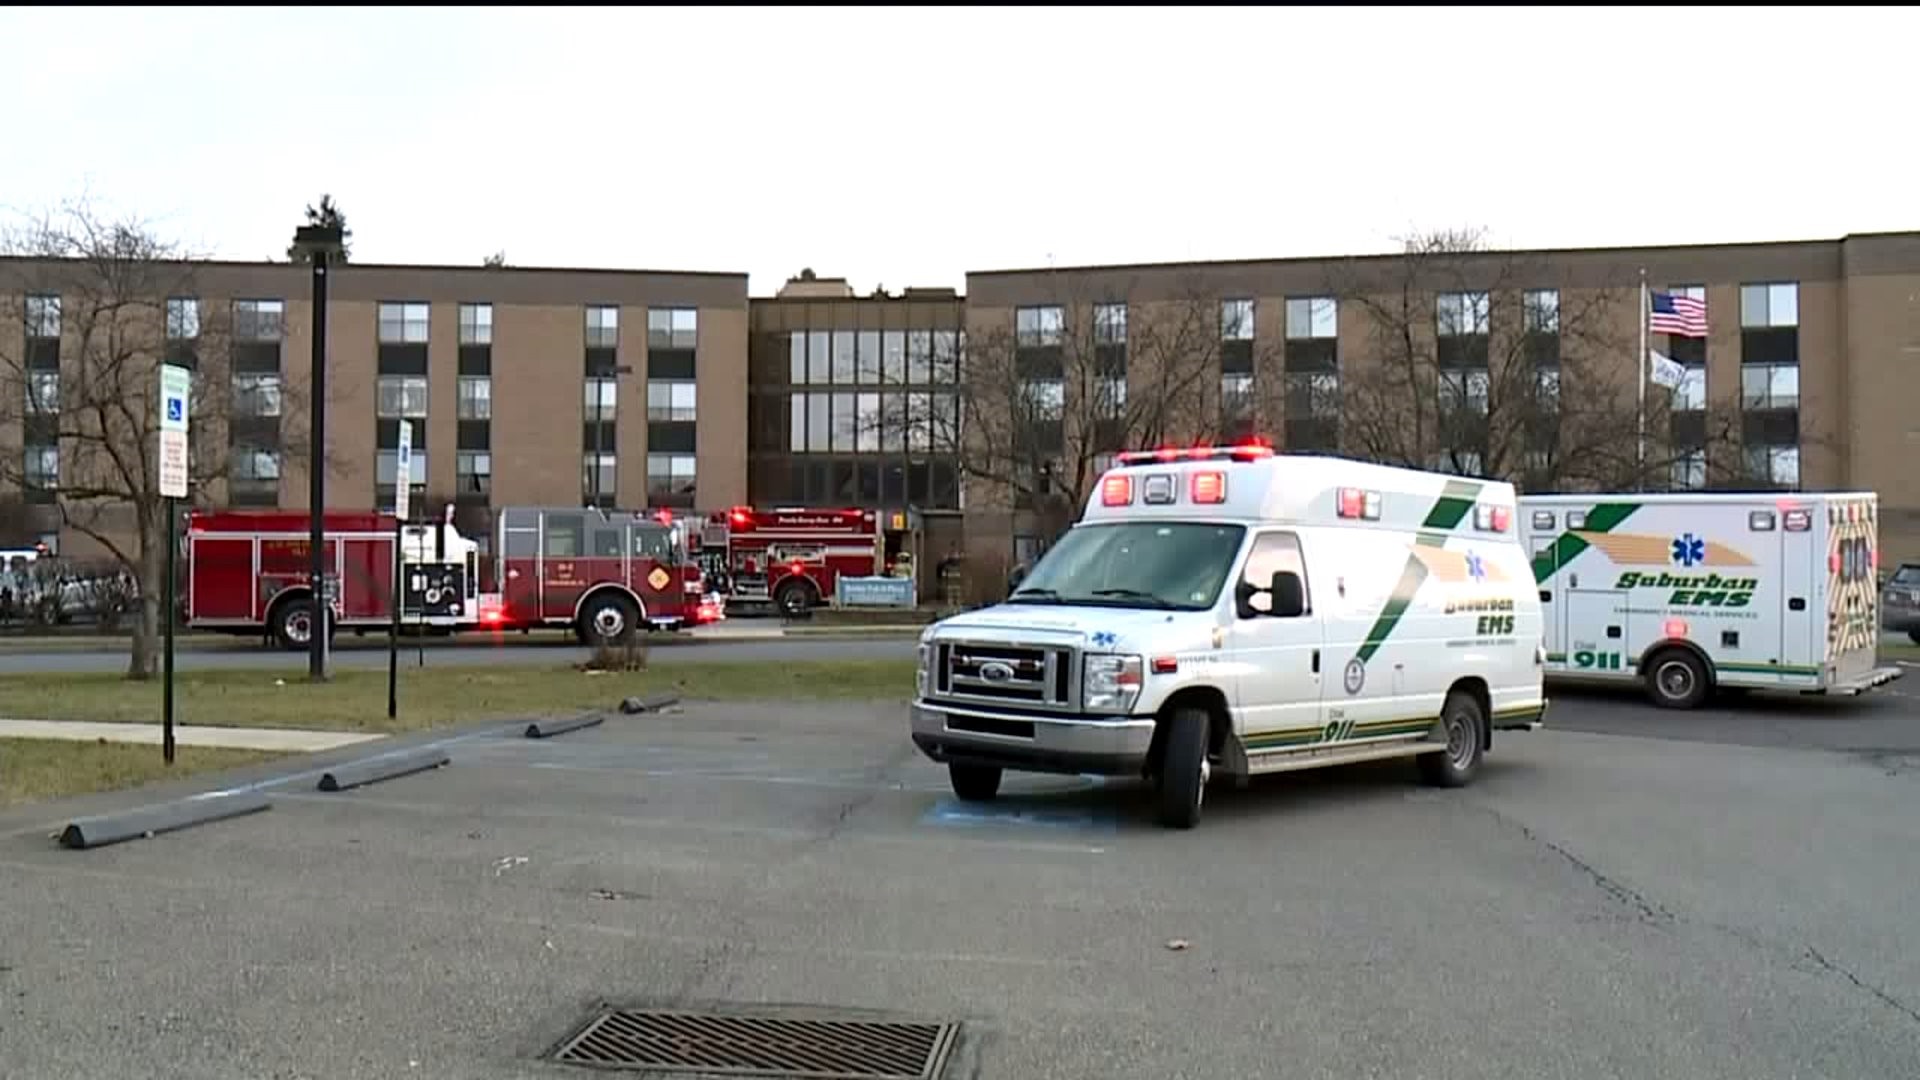 One Woman Dead after Fire at Elderly Apartments in East Stroudsburg